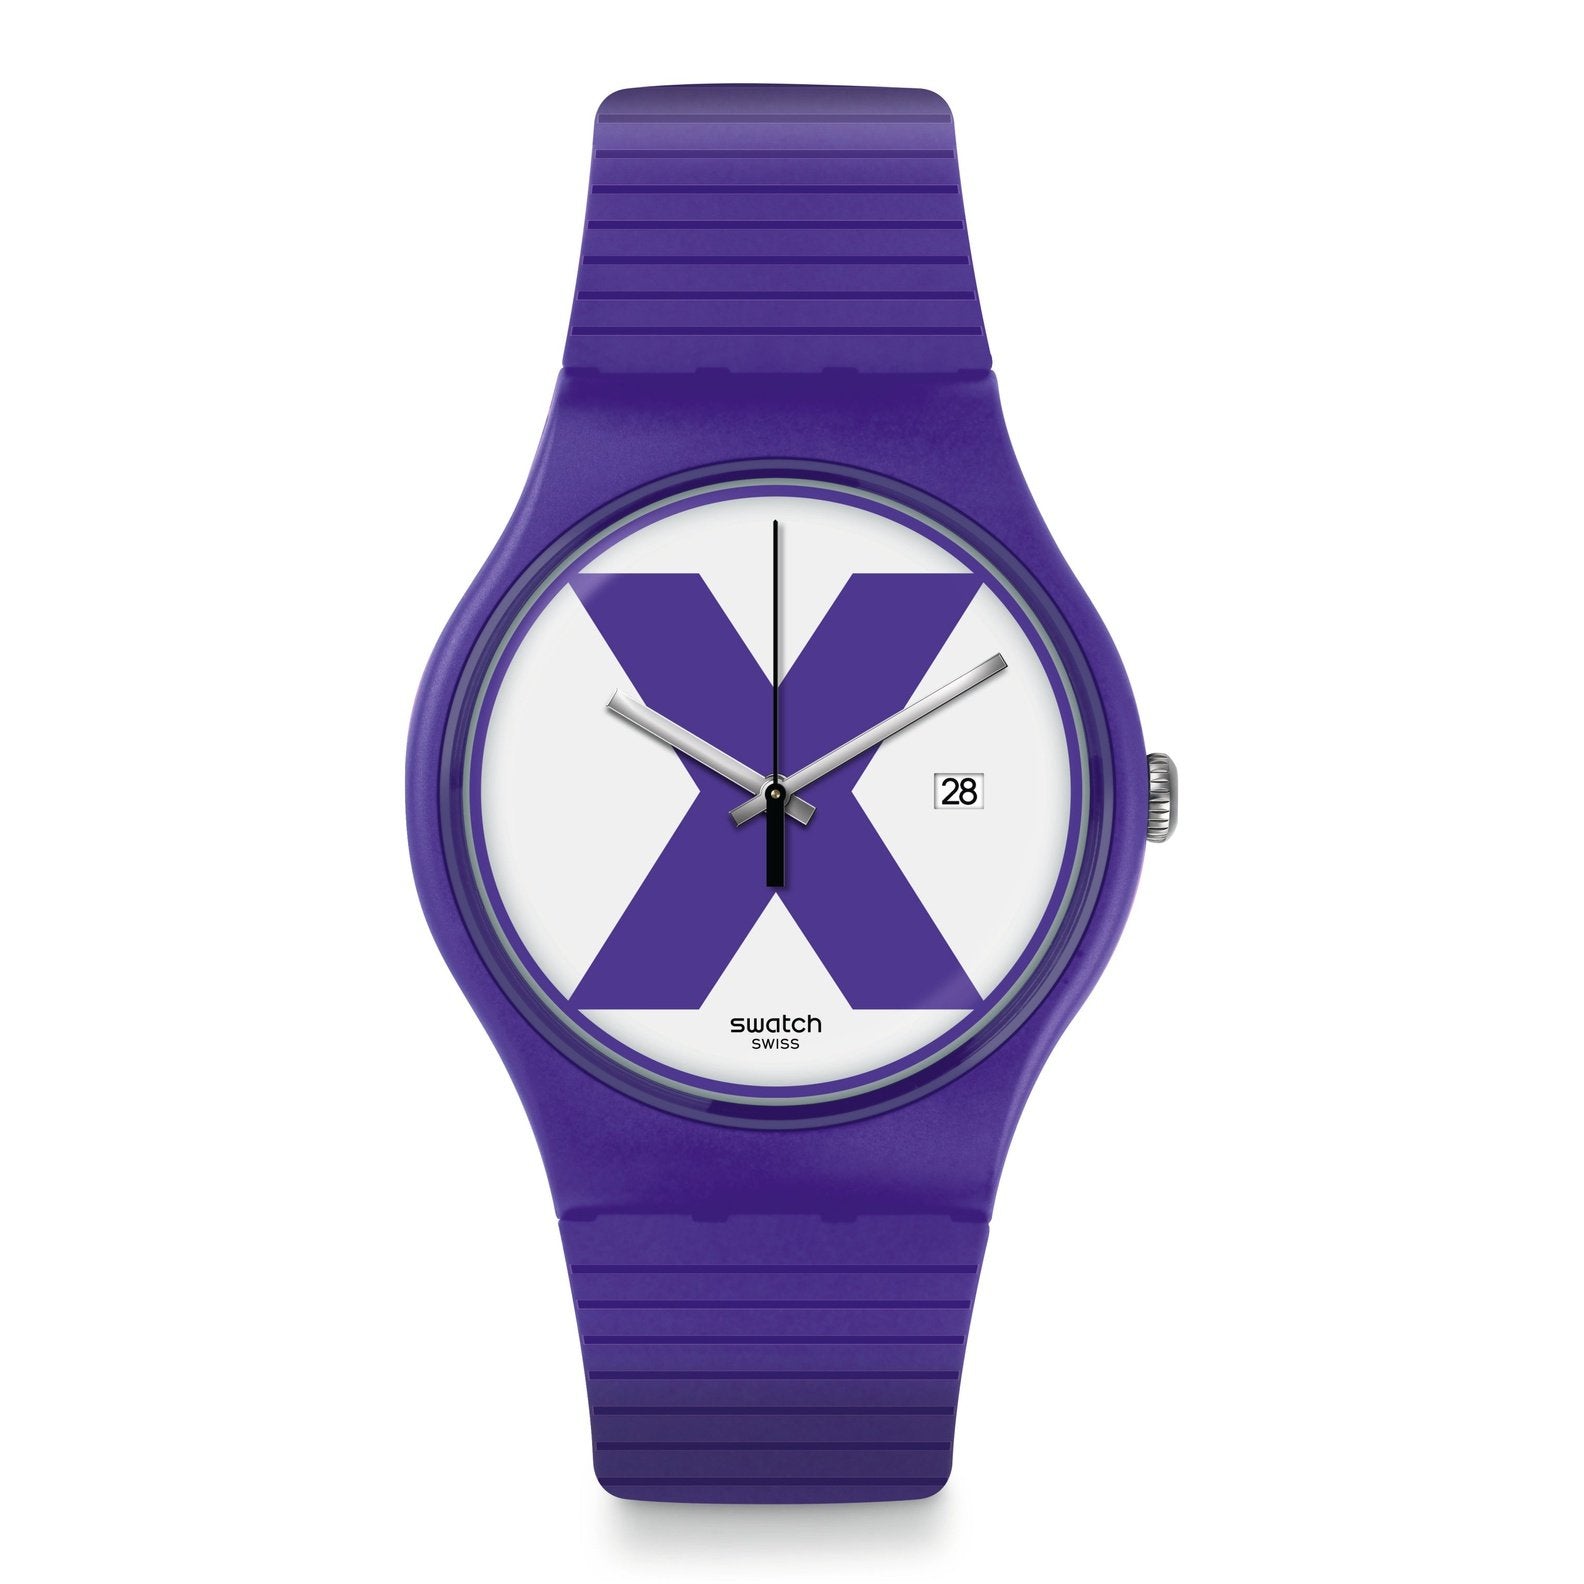 XX-RATED PURPLE Swatch